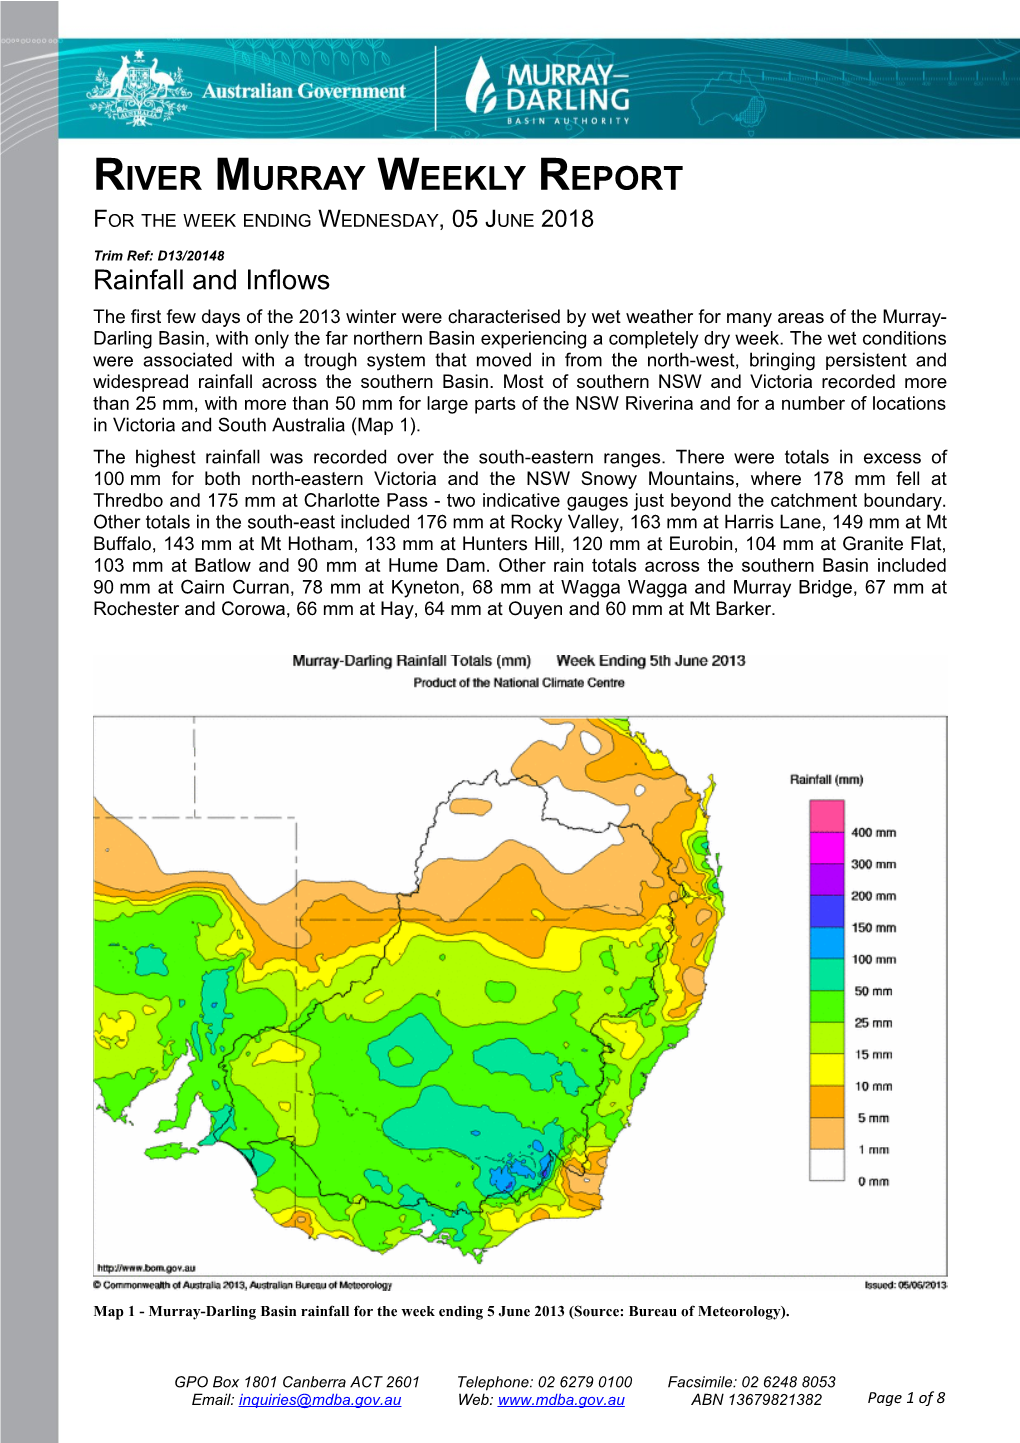 River Murray Operations Weekly Report 05 June 2013